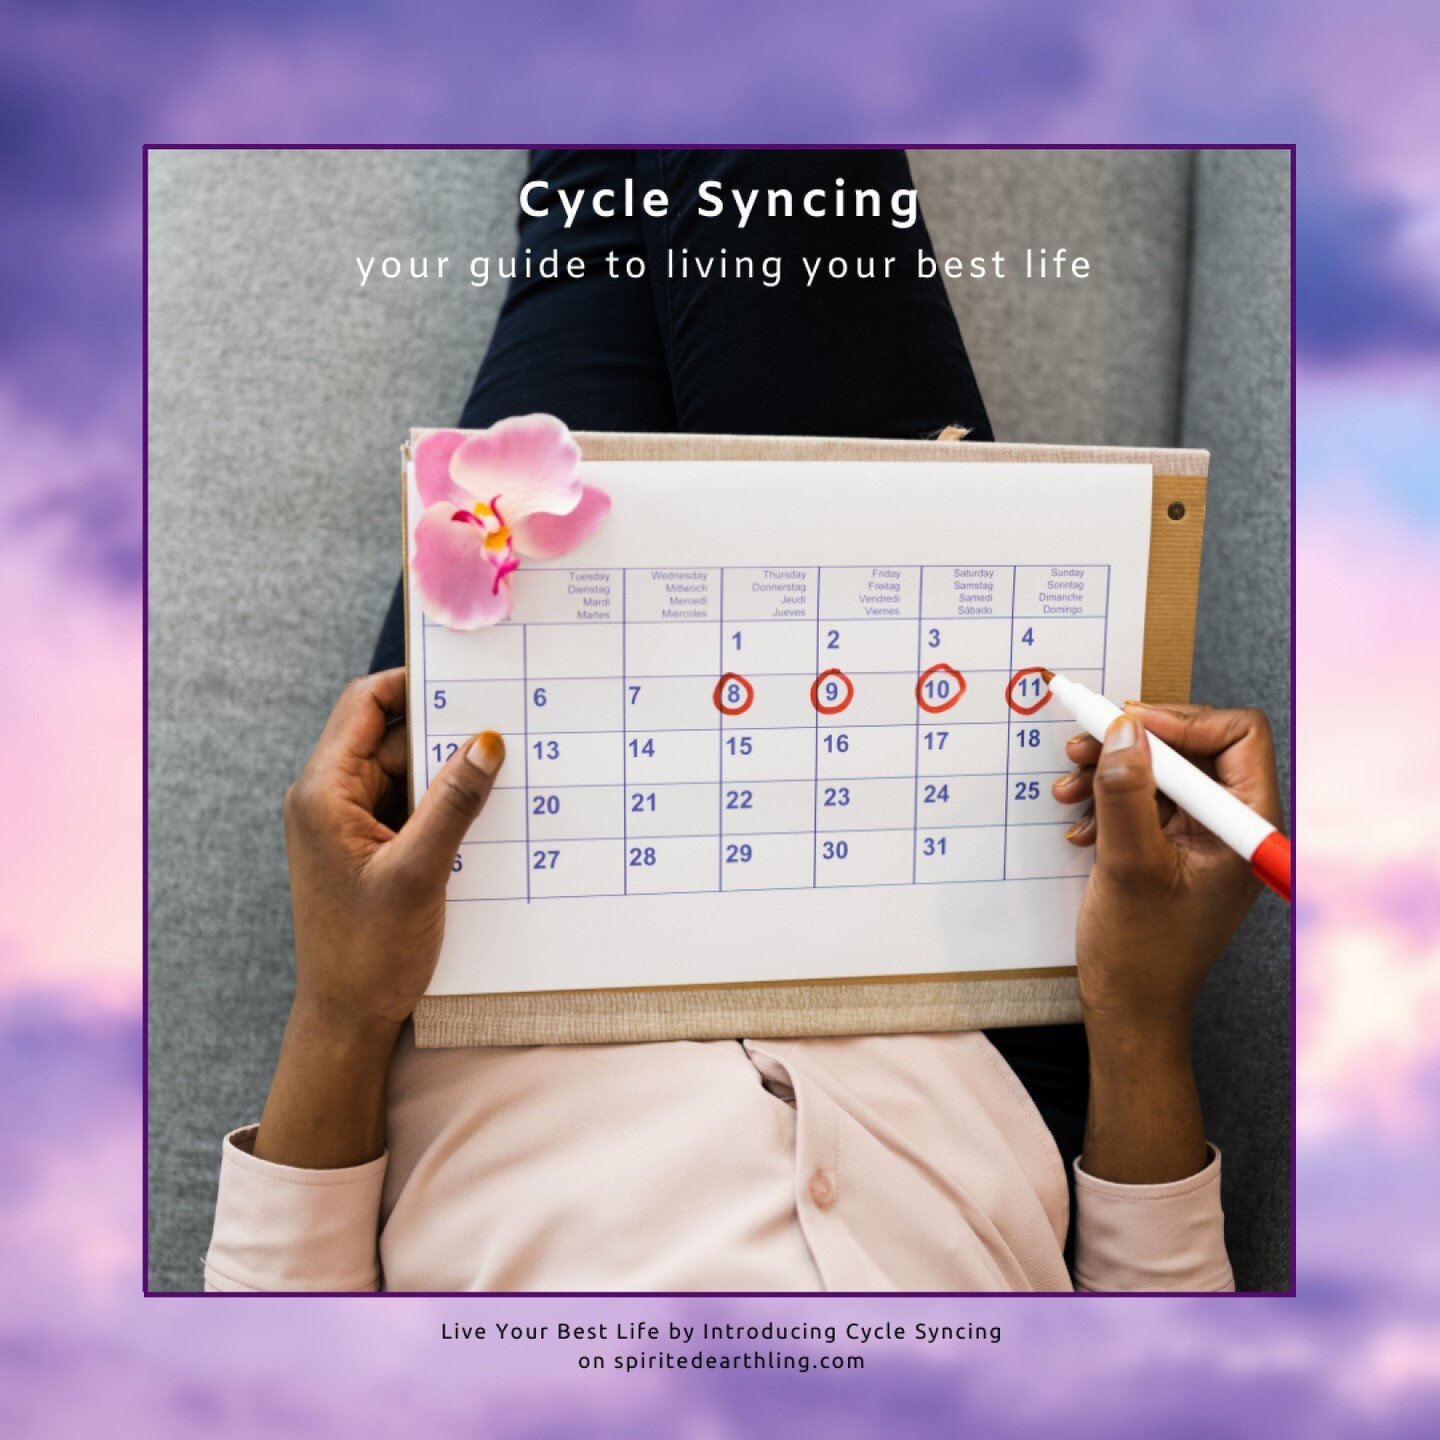 Use the phases of your menstrual cycle as a guide to living your best life, using the inner seasons, feminine archetypes, and themes to your advantage in your personal, professional, and social life.
#cyclesyncing #cyclesyncingmethod #cyclesyncinggui